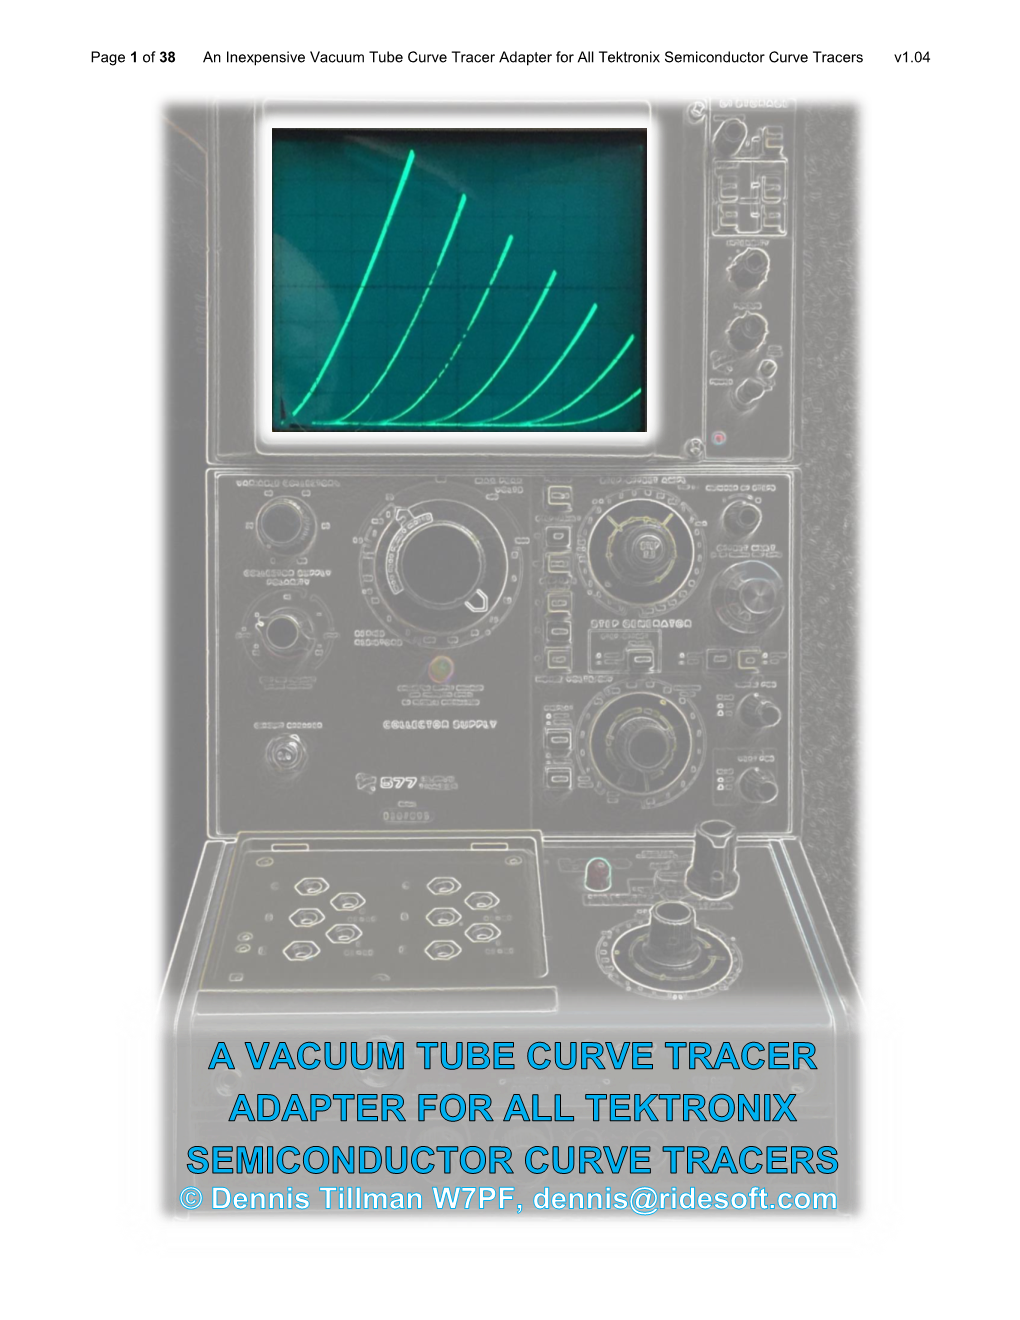 Of 38 an Inexpensive Vacuum Tube Curve Tracer Adapter for All Tektronix Semiconductor Curve Tracers V1.04